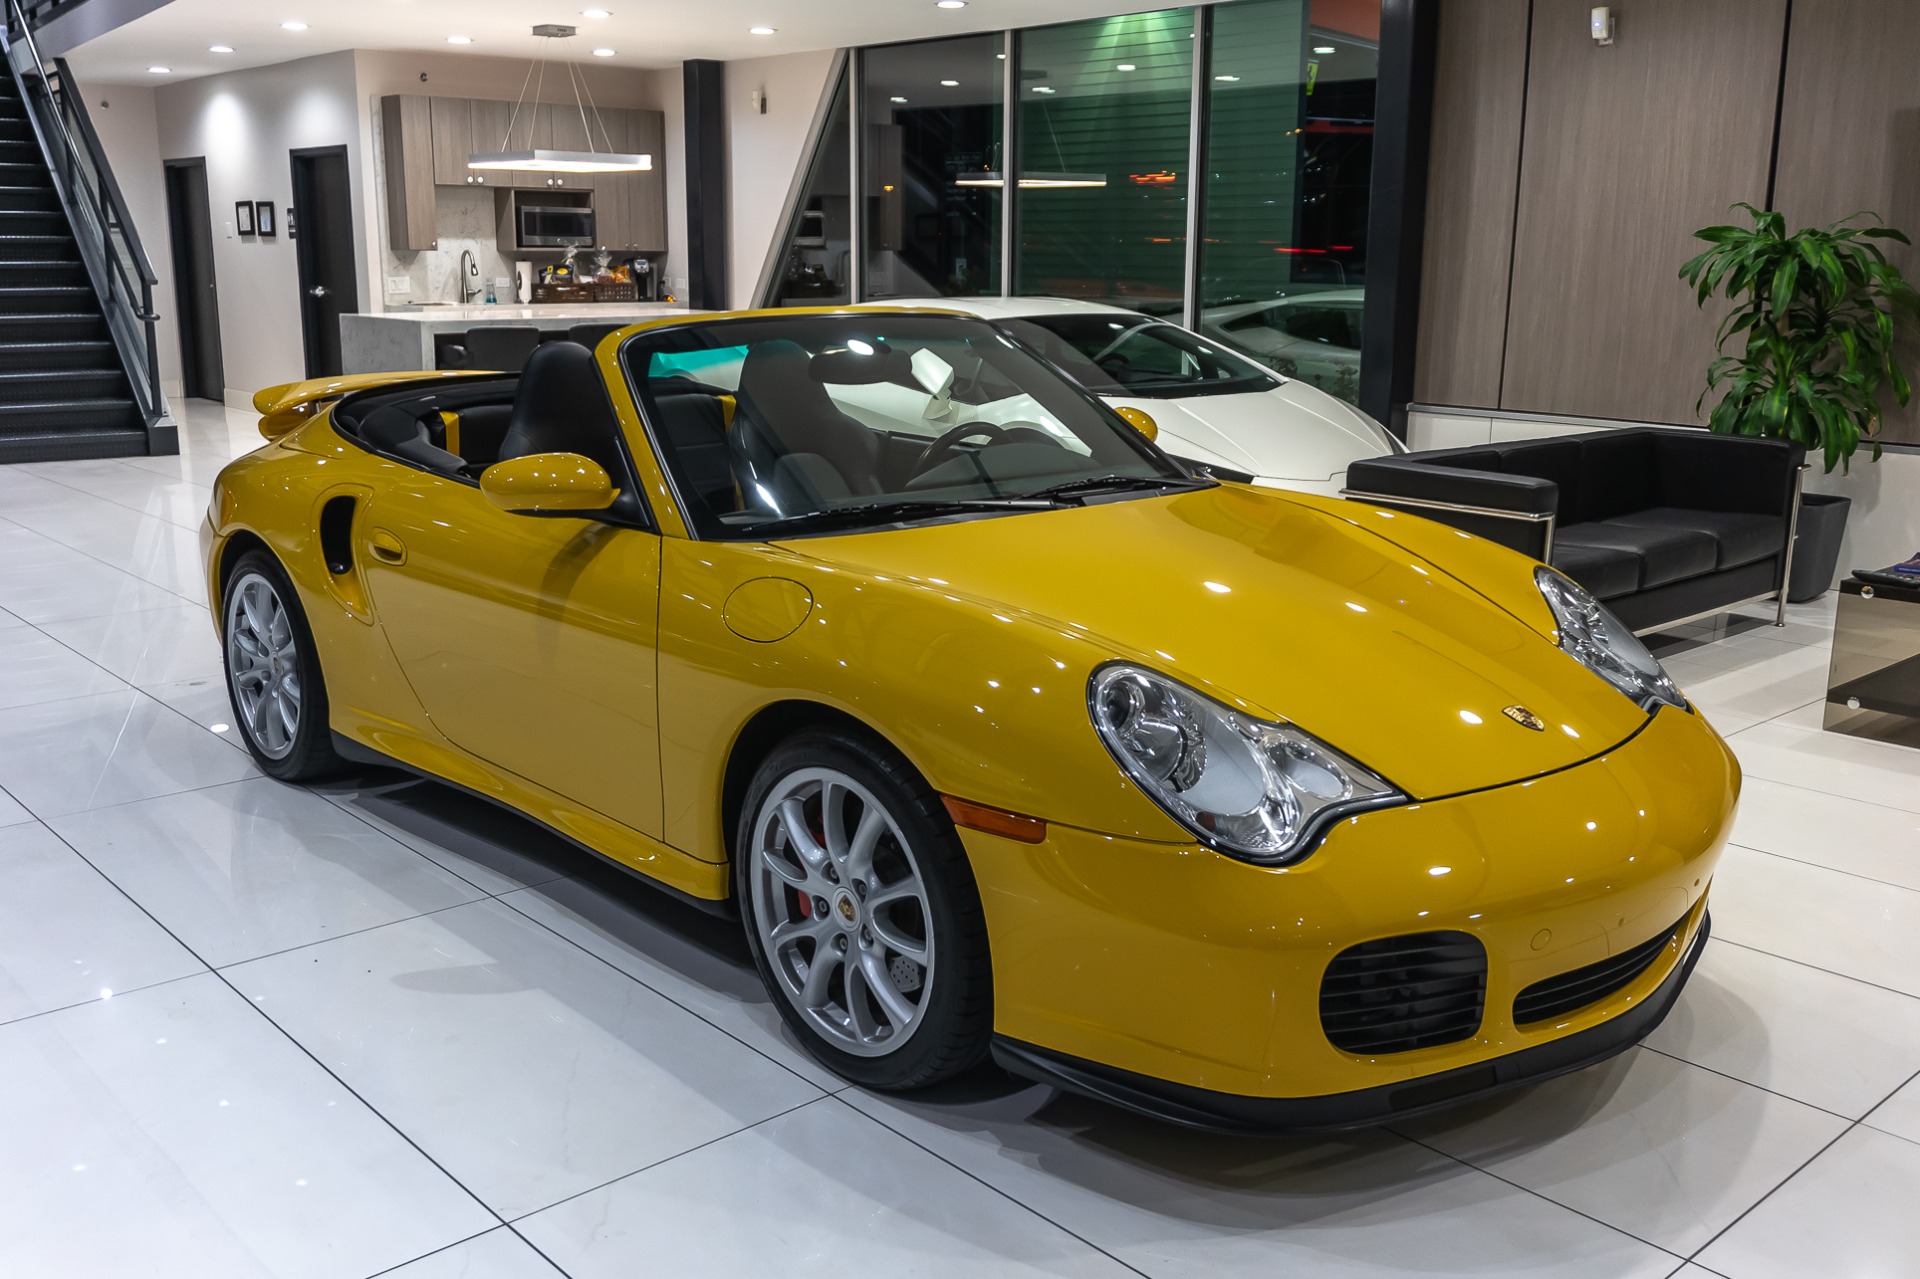 Used-2004-Porsche-911-Turbo-Cabriolet-6-Speed-MSRP-136205-CUSTOM-TAILORED